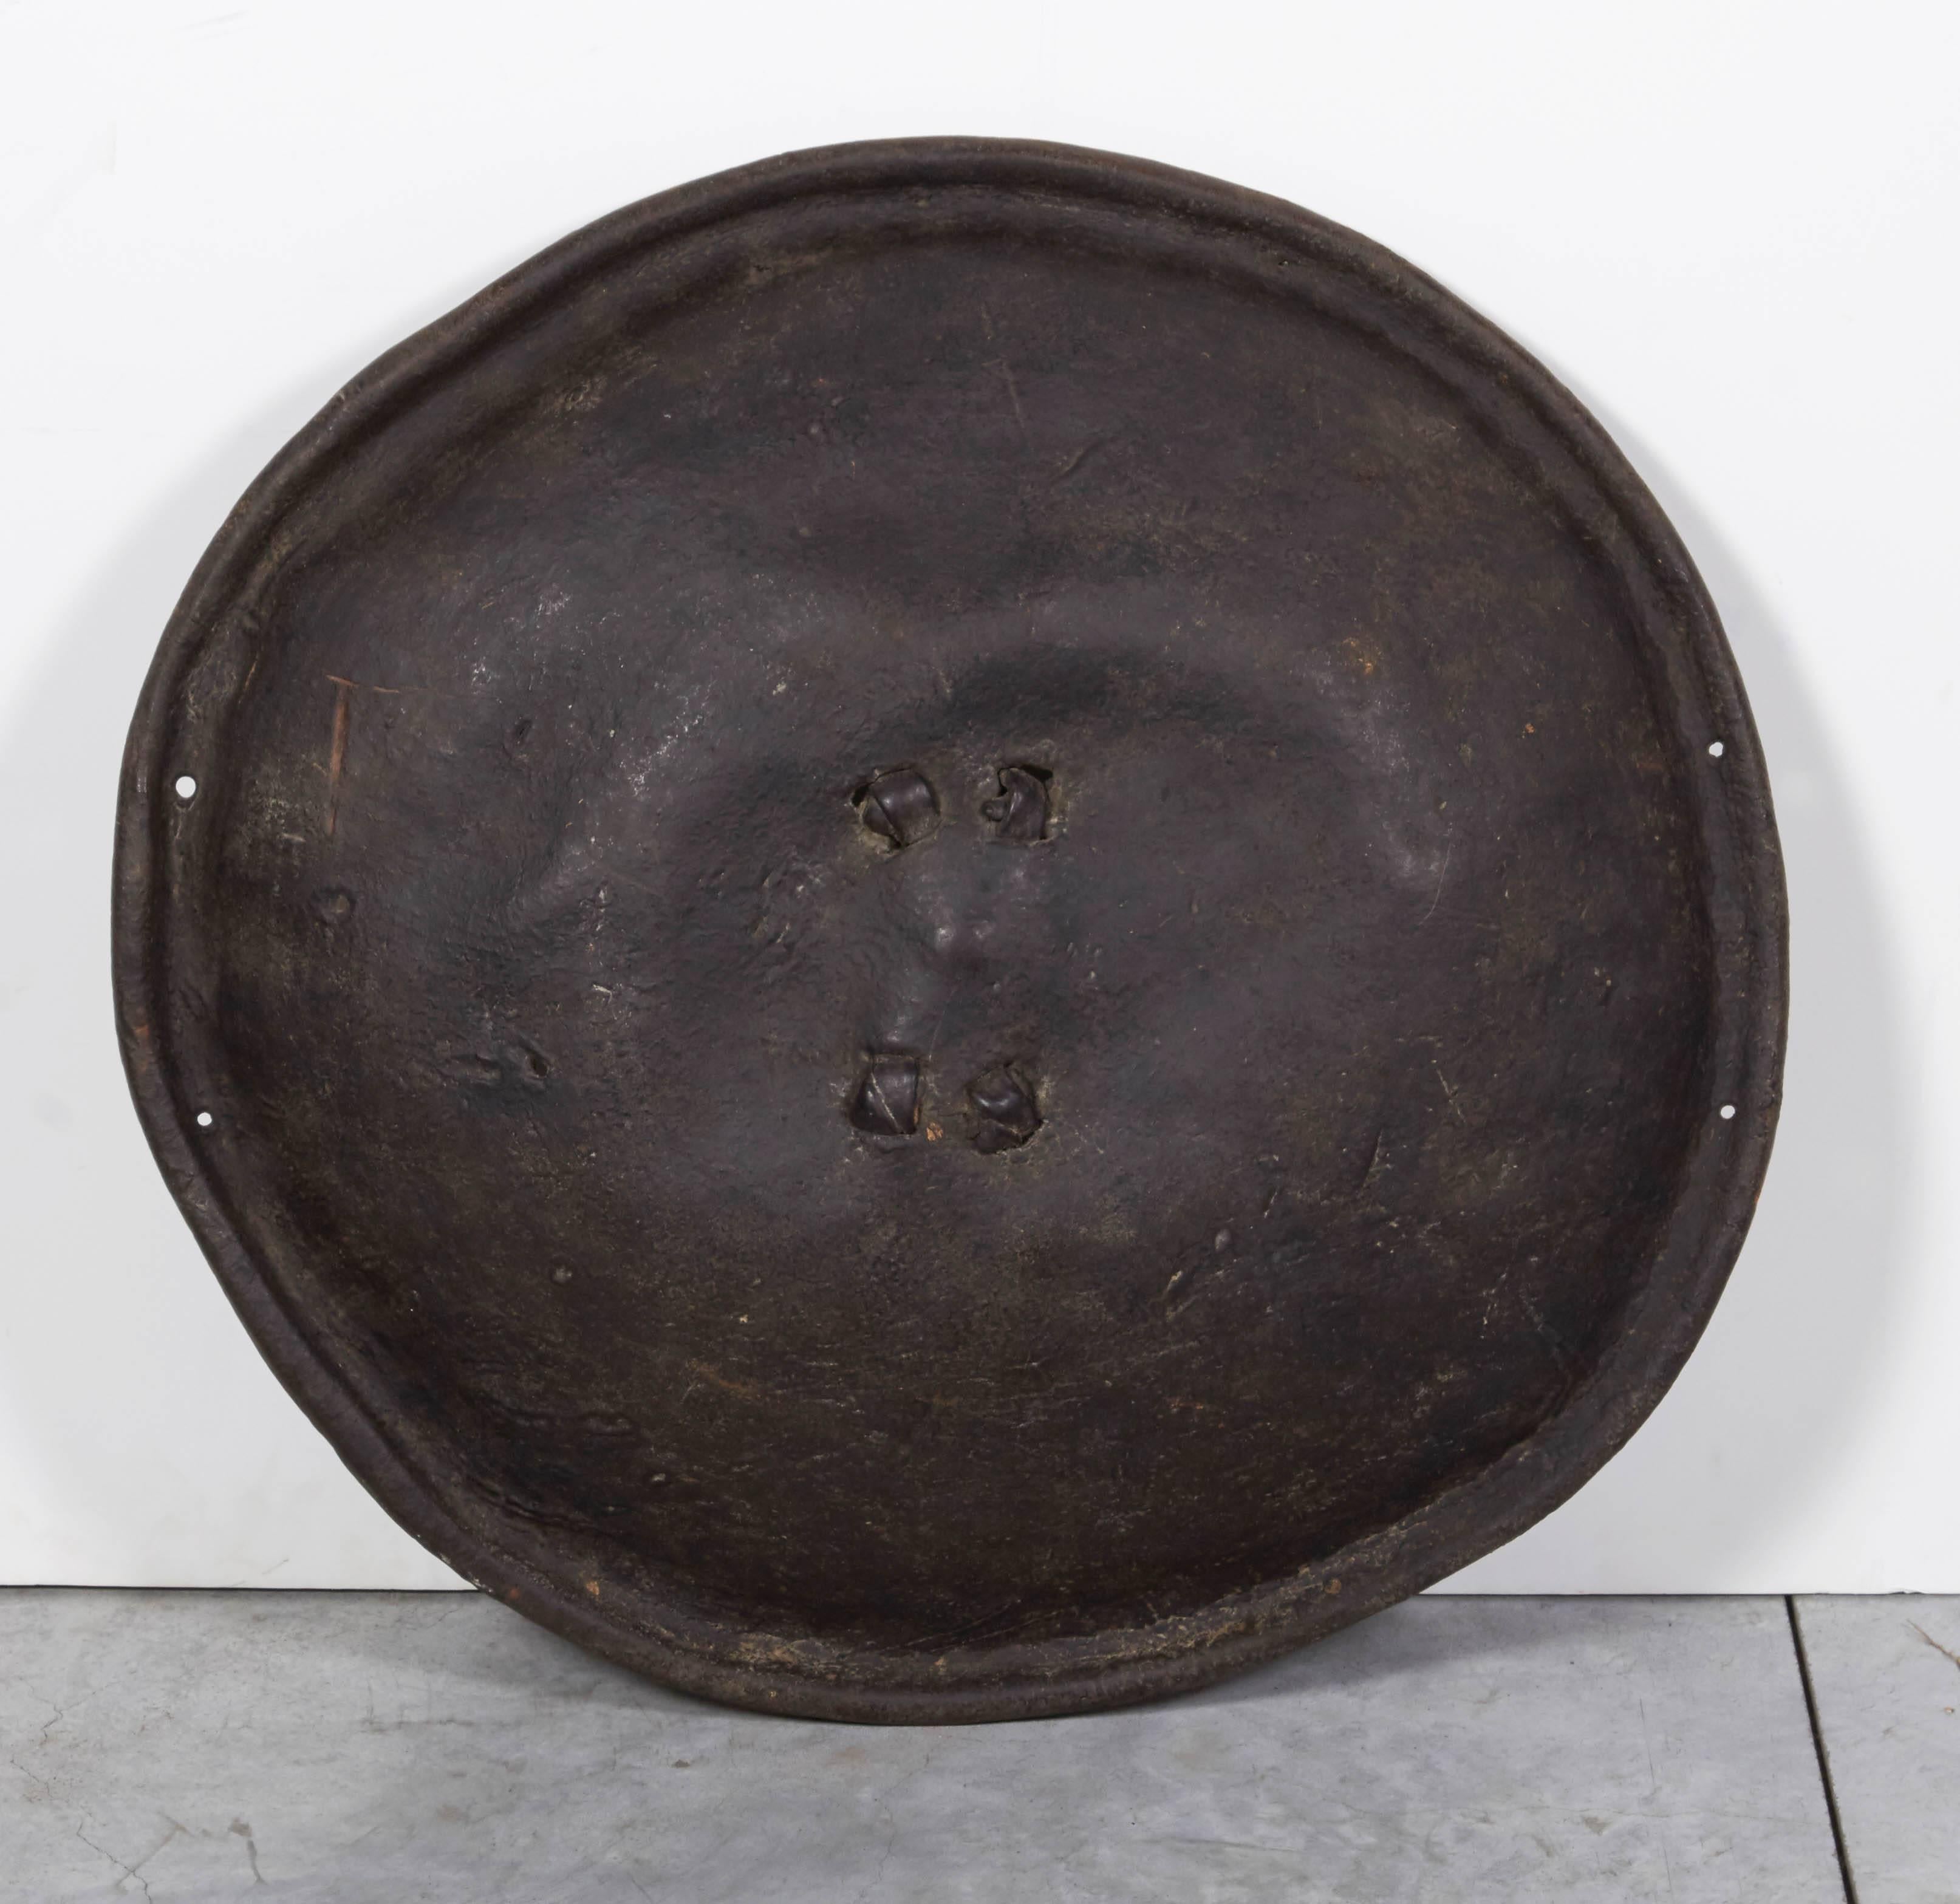 An early 20th century Ethiopian animal hide shield with leather knots at the centre securing the crudely formed handle. This piece has significant and attractive wear showing it's age and use. Works very well either hanging on a wall, or mounted on